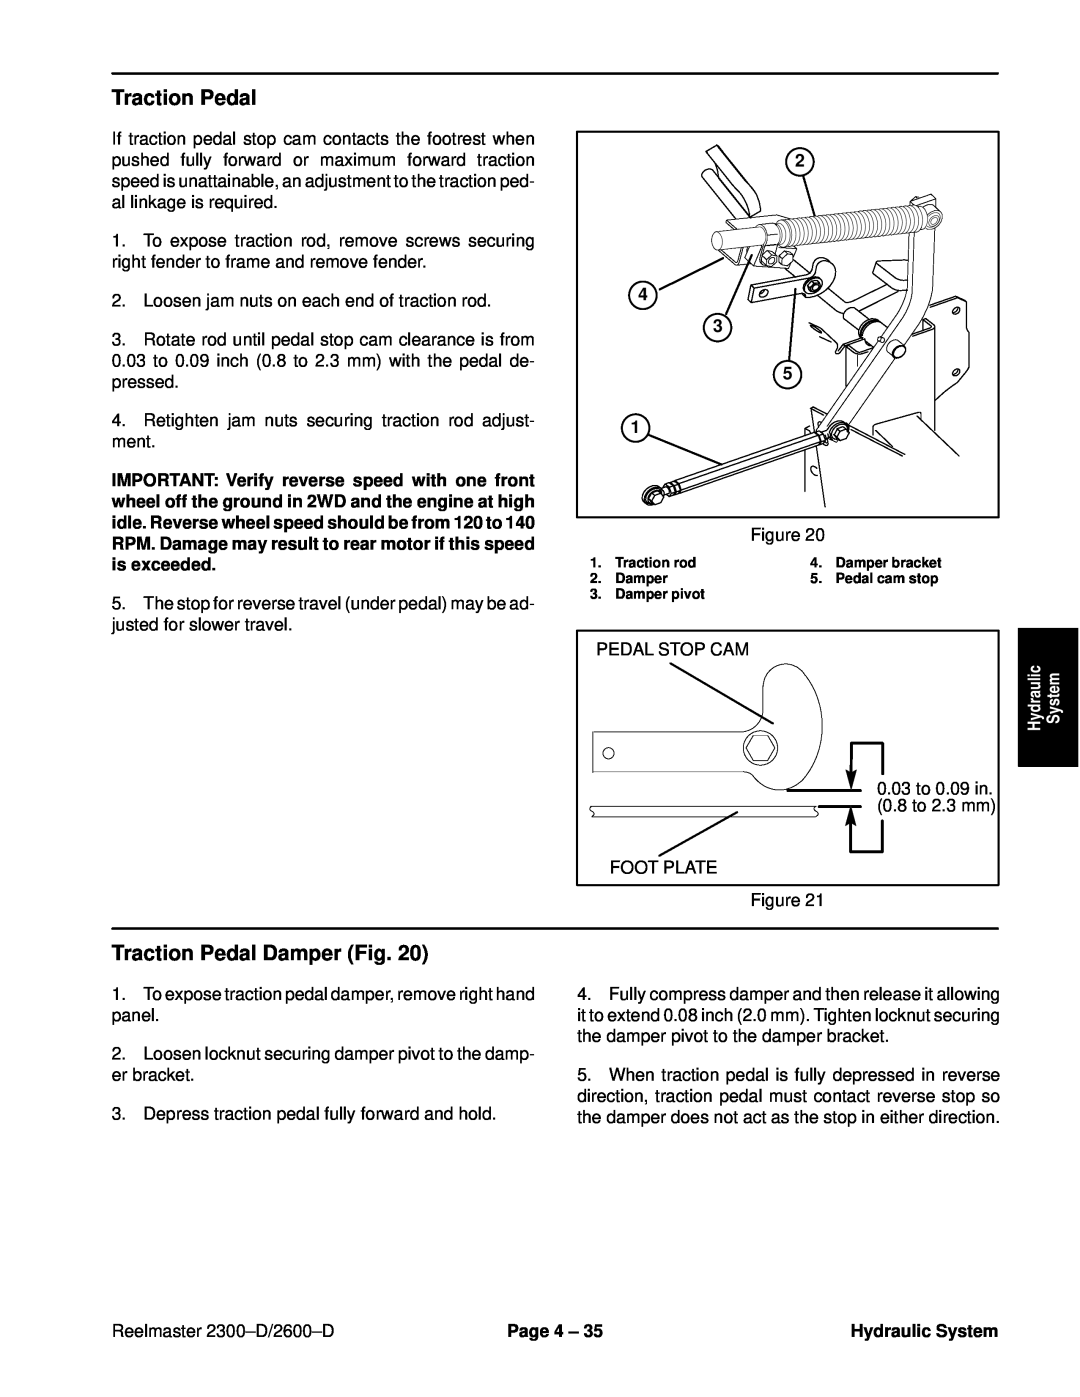 Toro 2600D, 2300-D service manual Traction Pedal Damper Fig, Reelmaster 2300±D/2600±D, Page 4 ±, Hydraulic System 